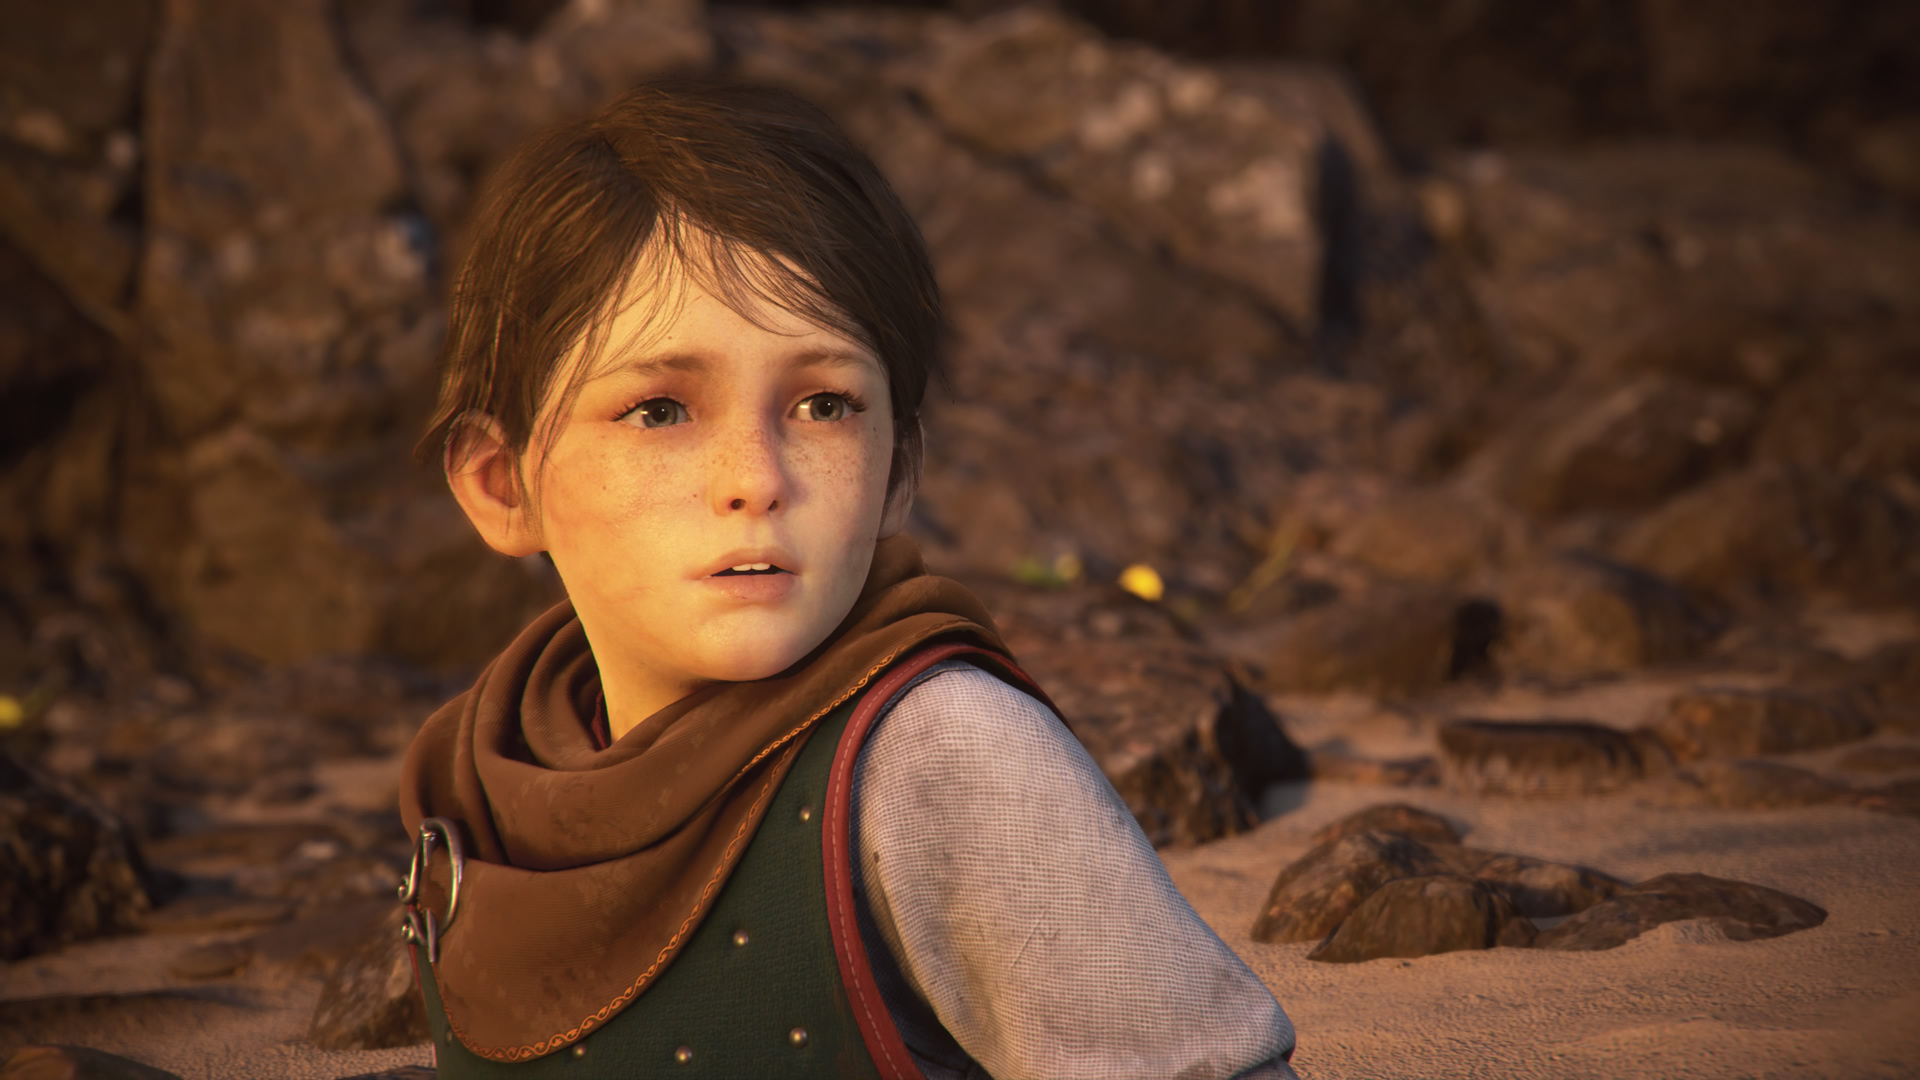 A Plague Tale: Requiem starts on October 18. Watch the gameplay video